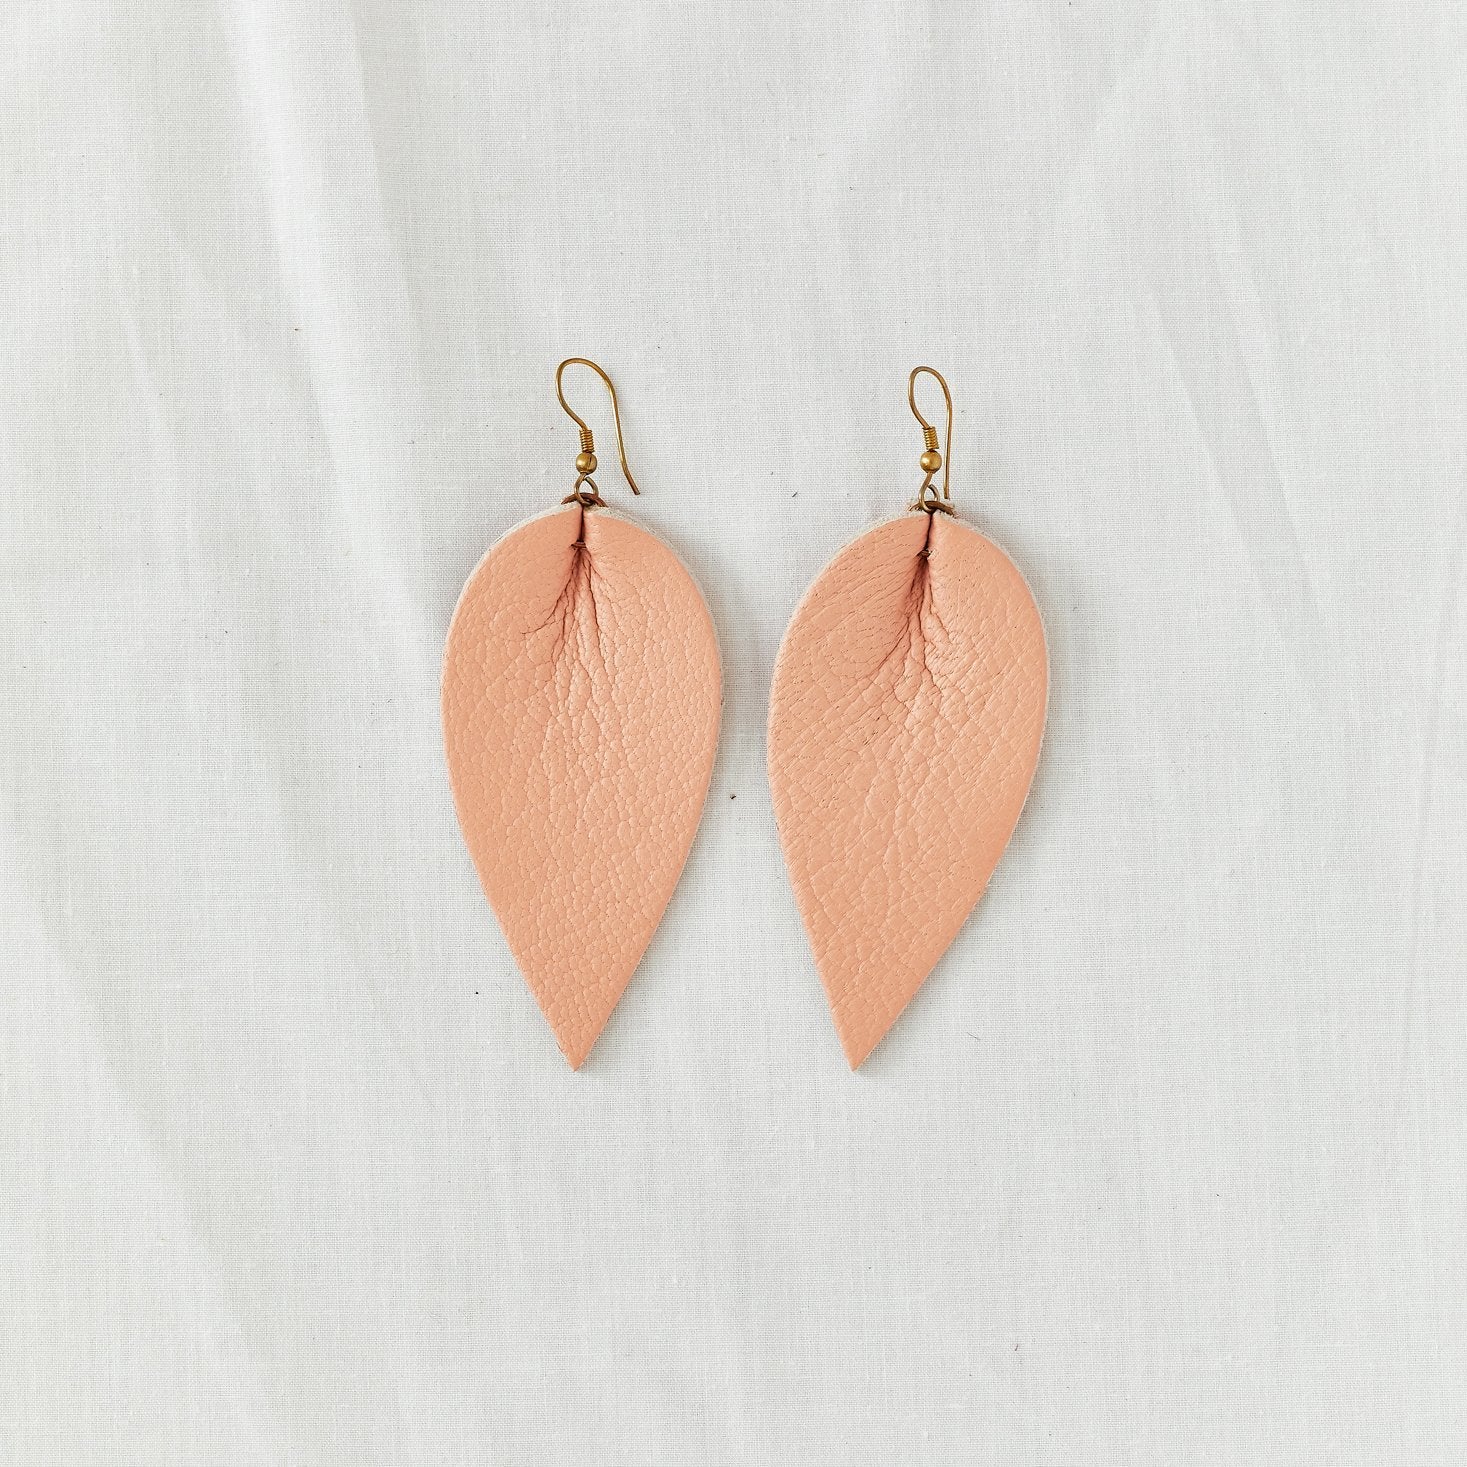 Classic design that transitions effortlessly from day to night, these blush leather leaf earrings are handcrafted from sustainable leather.